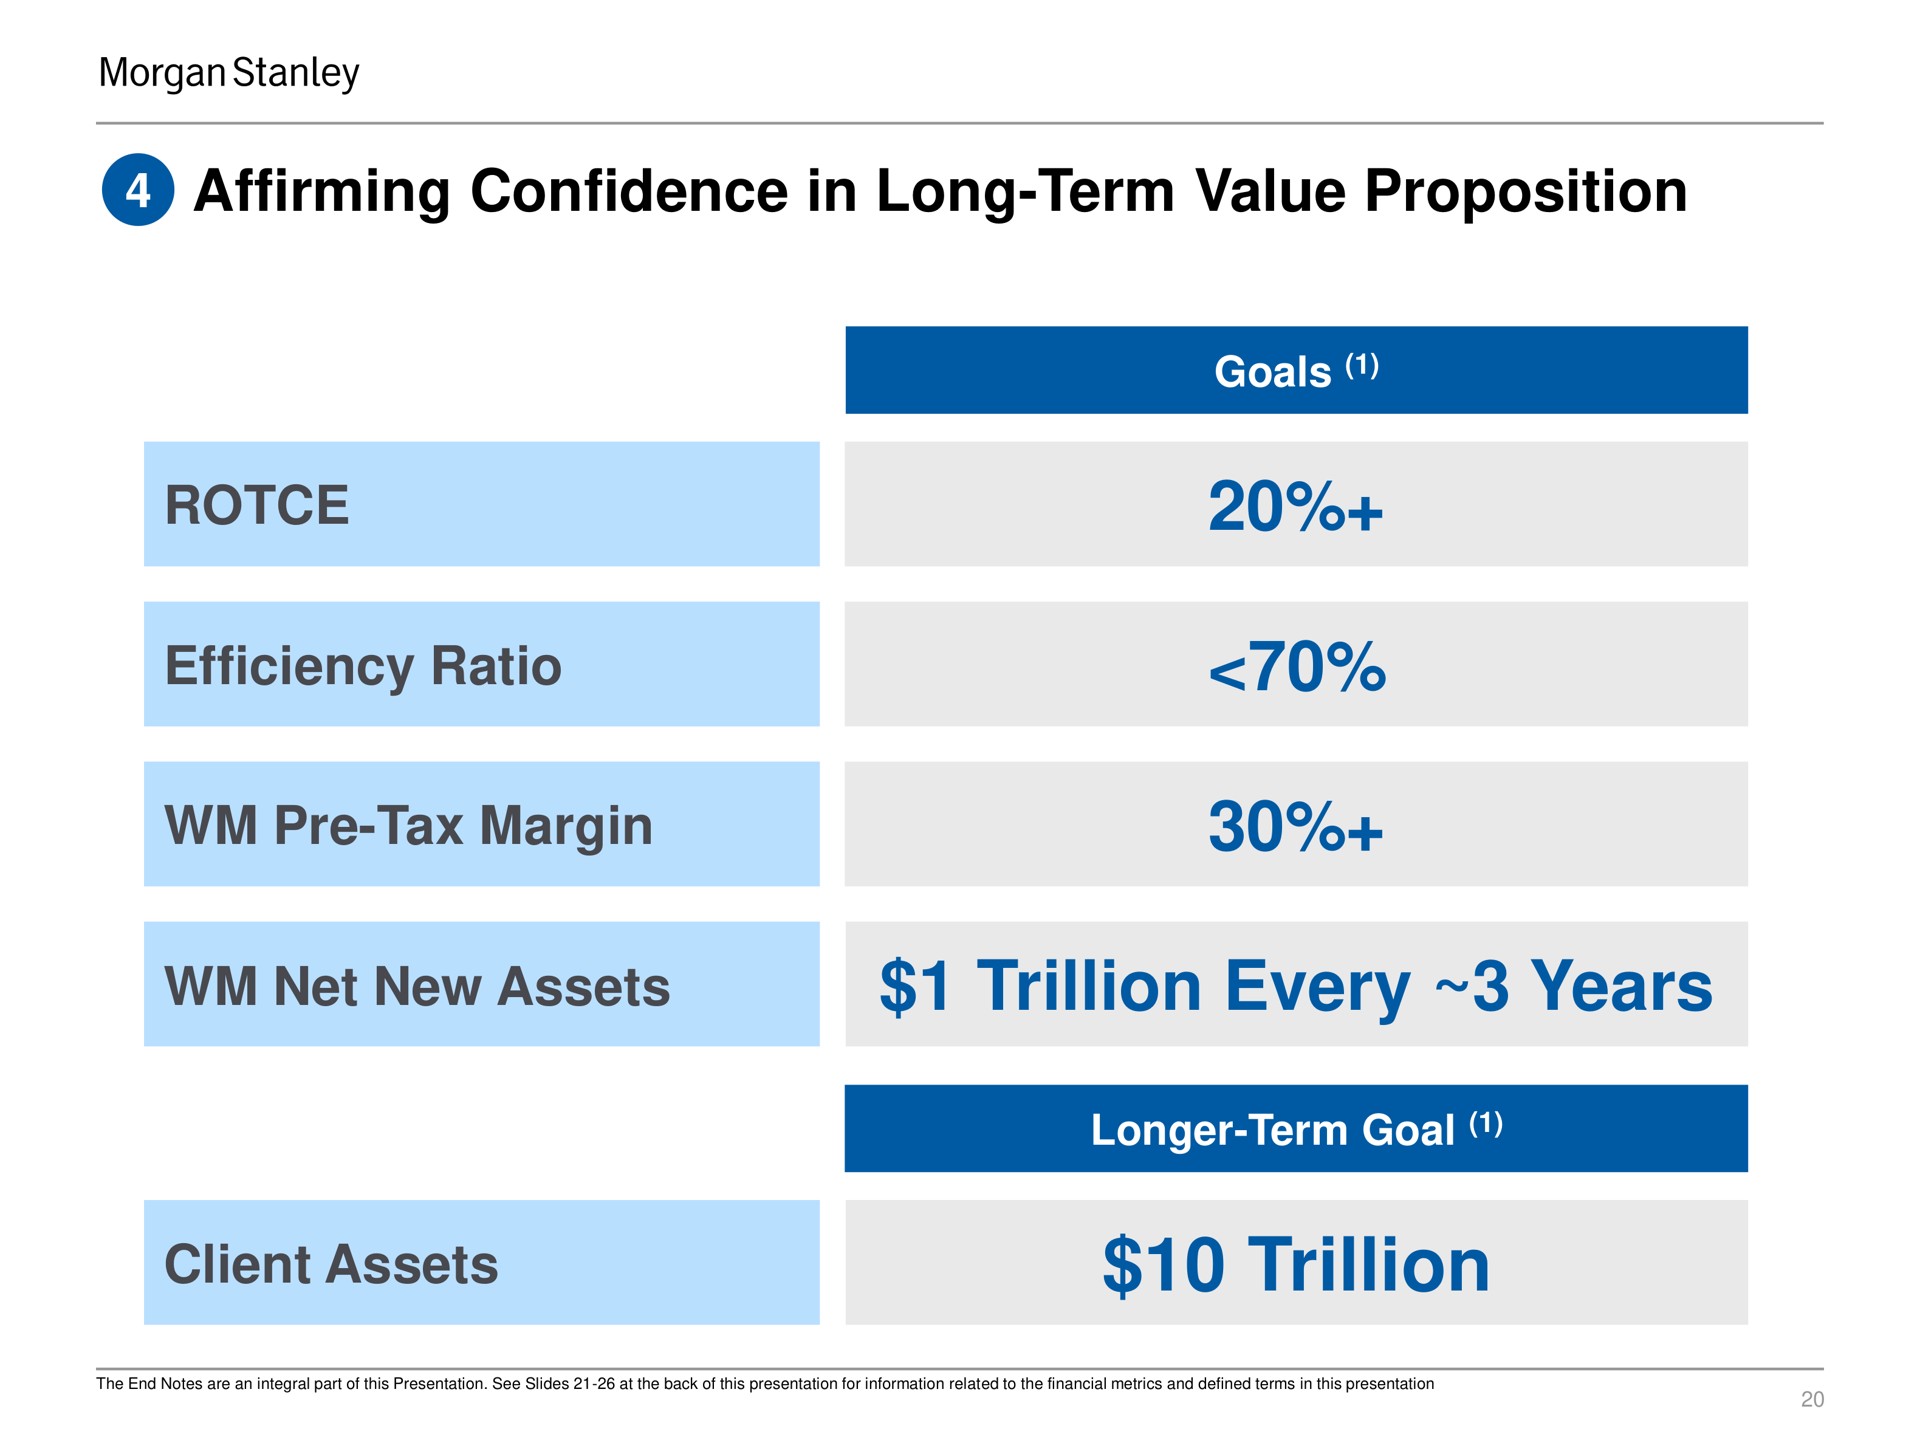 affirming confidence in long term value proposition efficiency ratio tax margin goals net new assets trillion every years client assets longer term goal trillion | Morgan Stanley